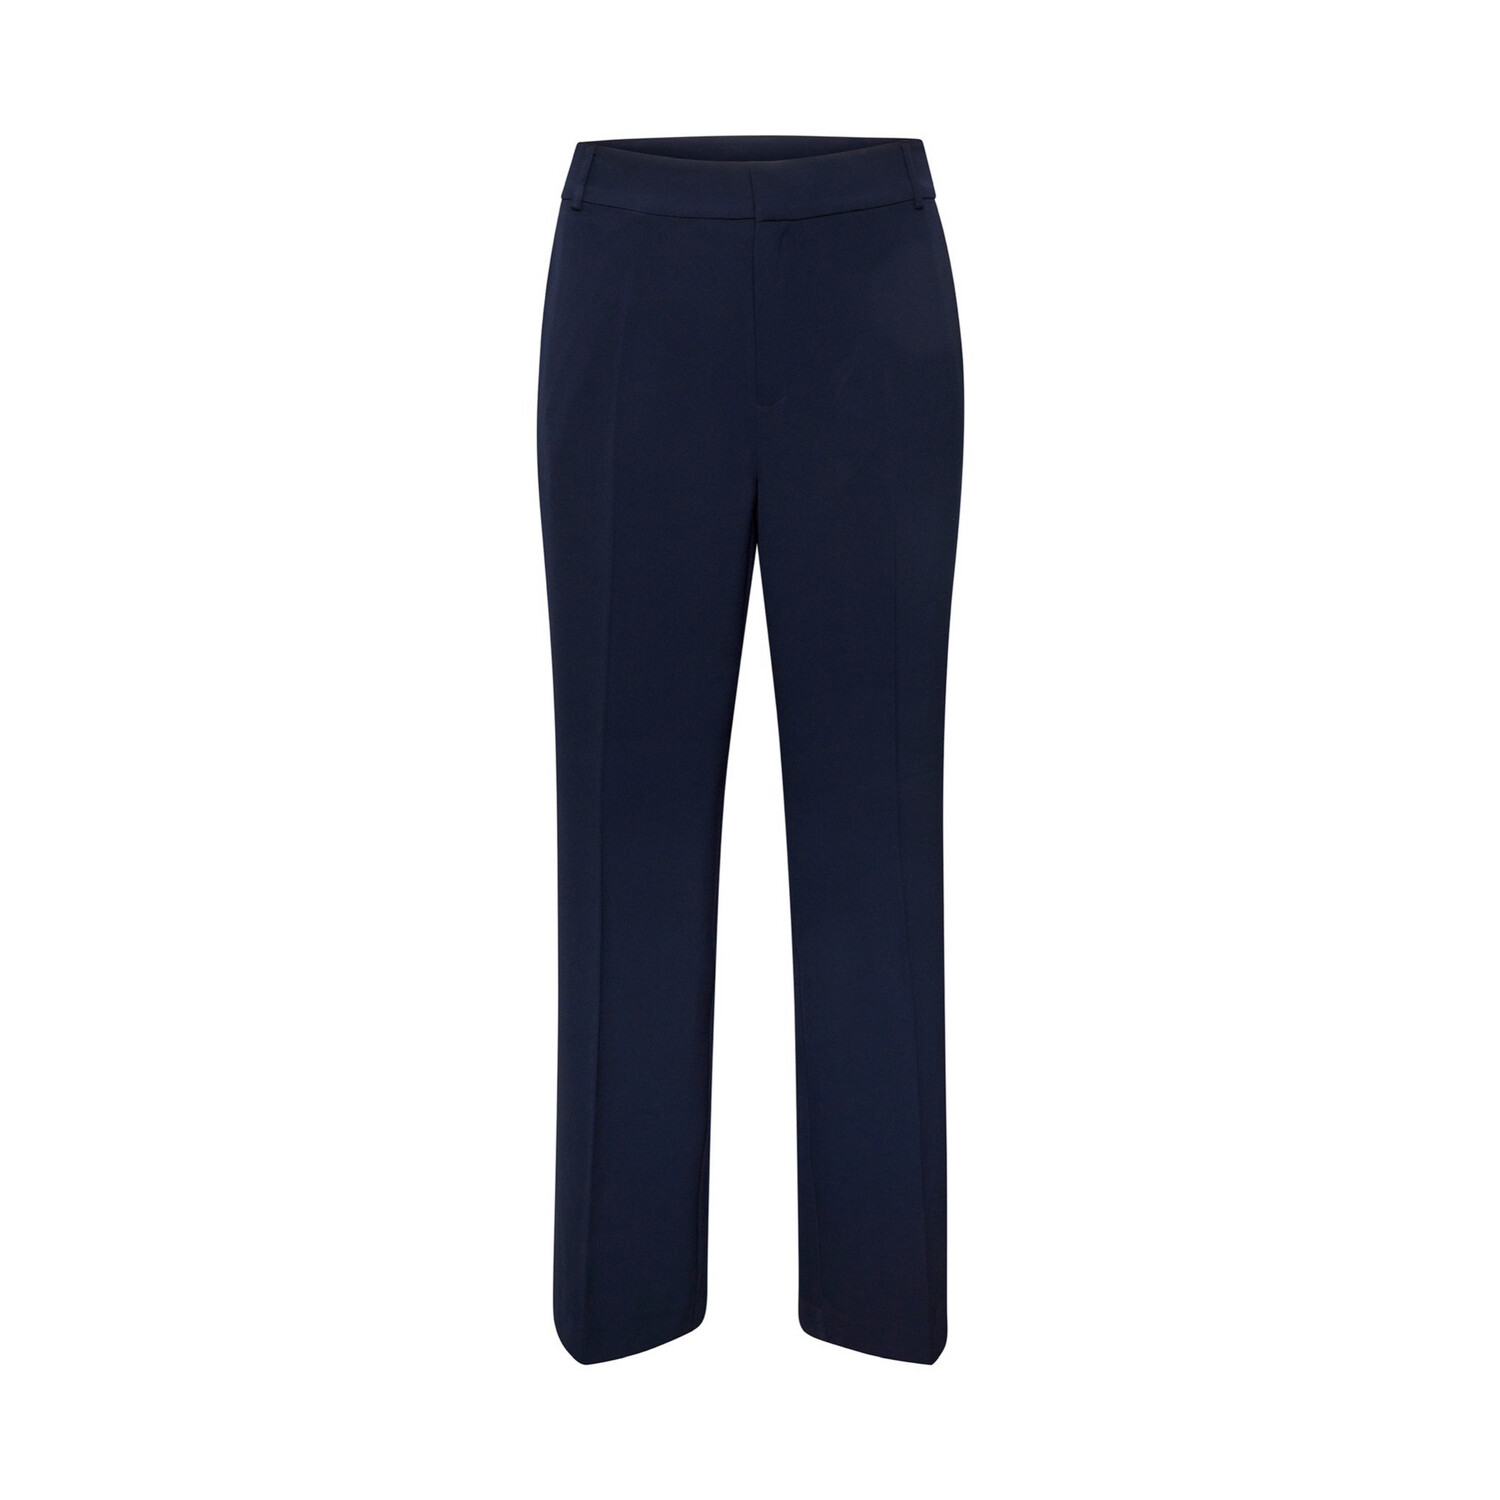 My Essential Wardrobe - The Wide TAILORED Pant